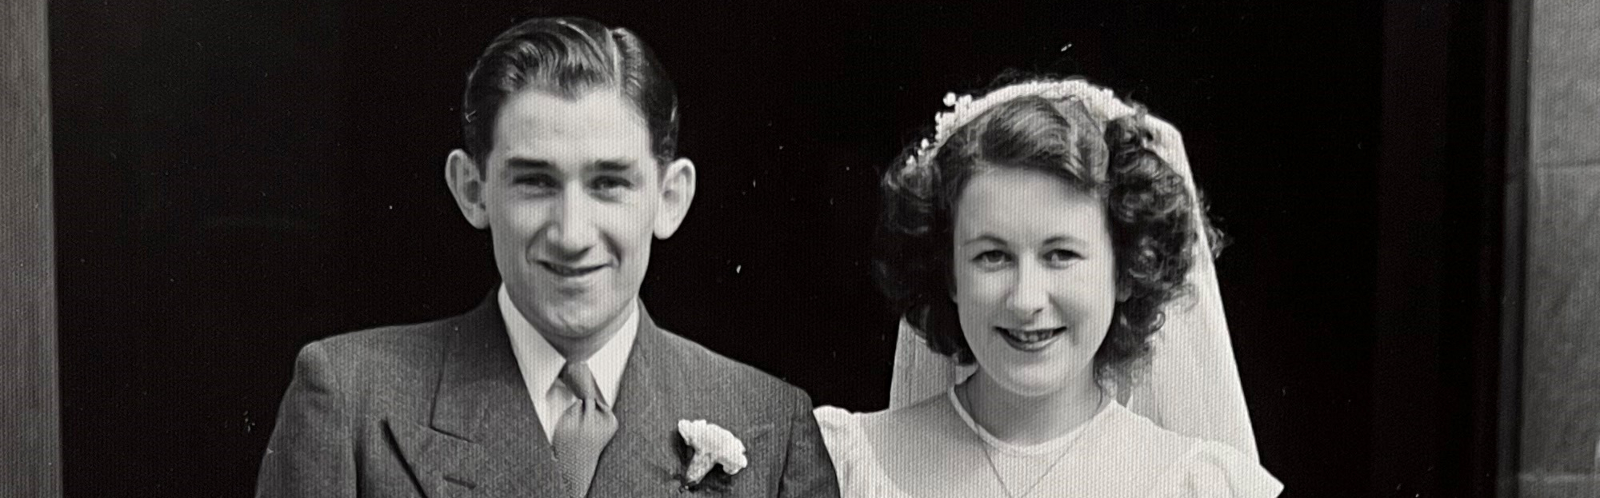 A black-and-white photo of a young man and woman on their wedding day